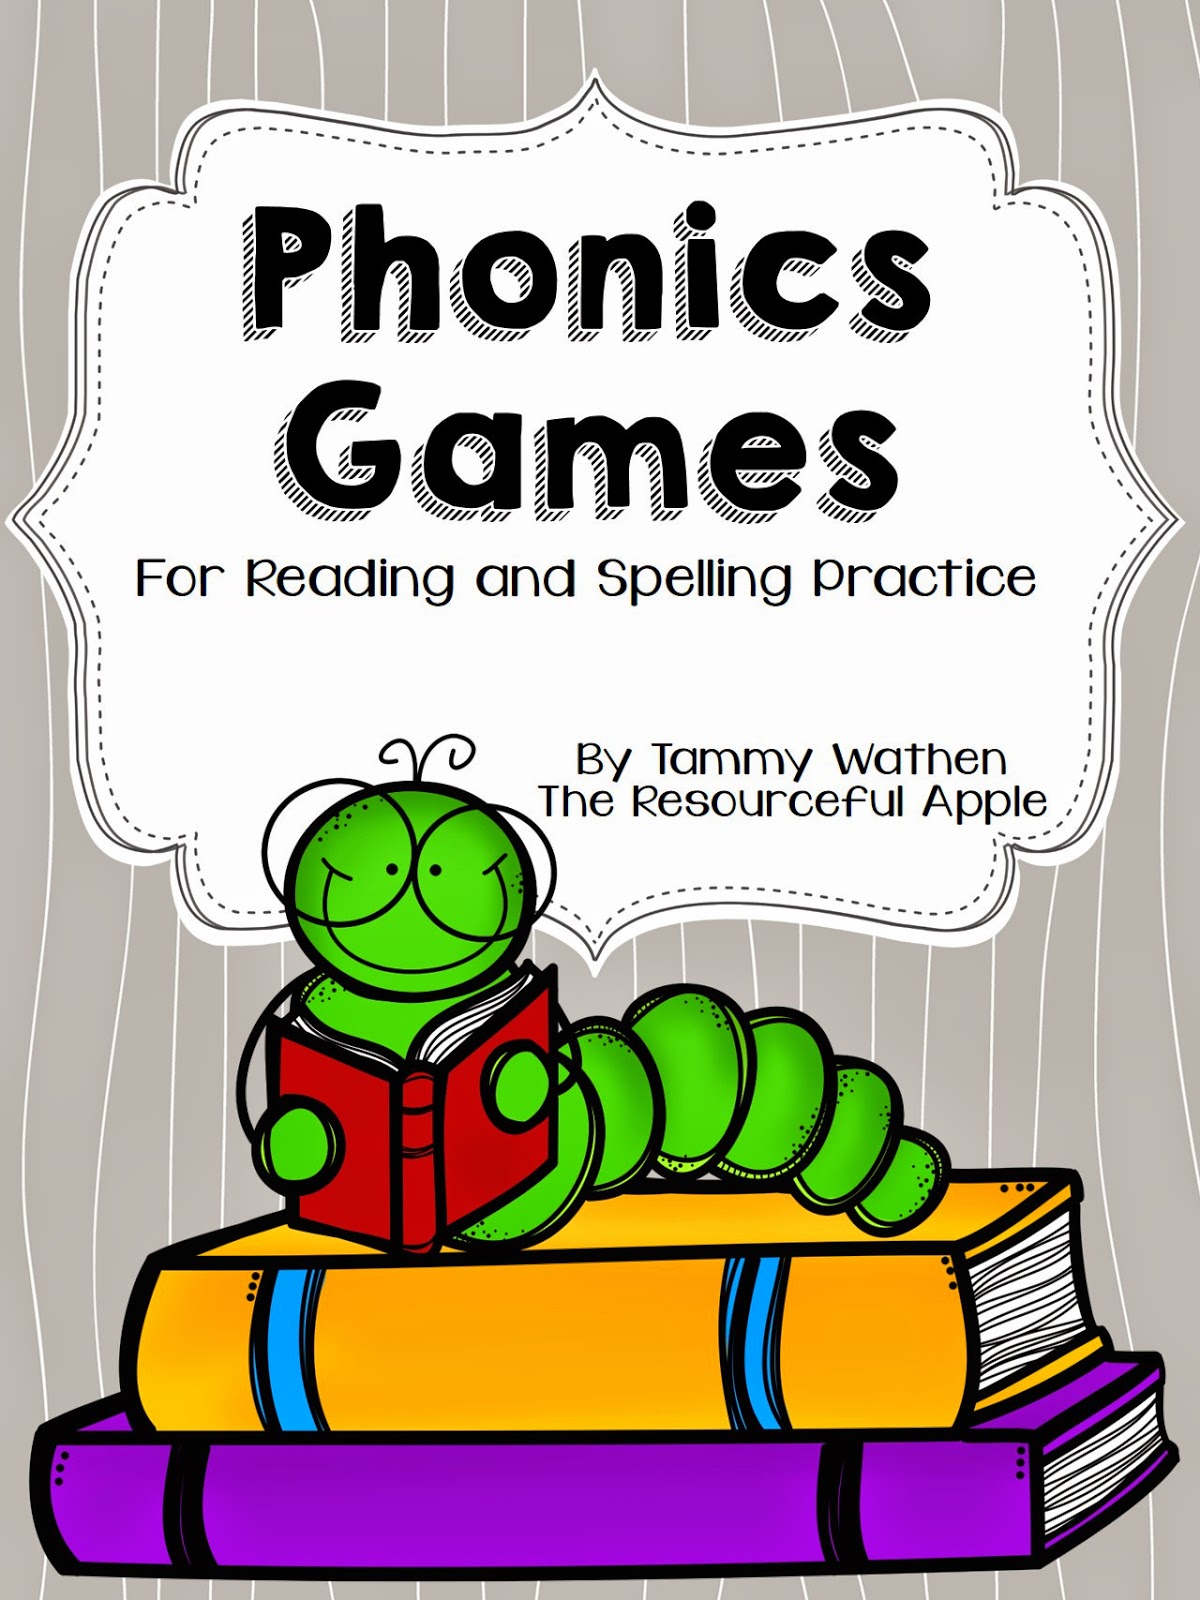 http://www.teacherspayteachers.com/Product/Phonics-Games-For-Reading-and-Spelling-Practice-1368815